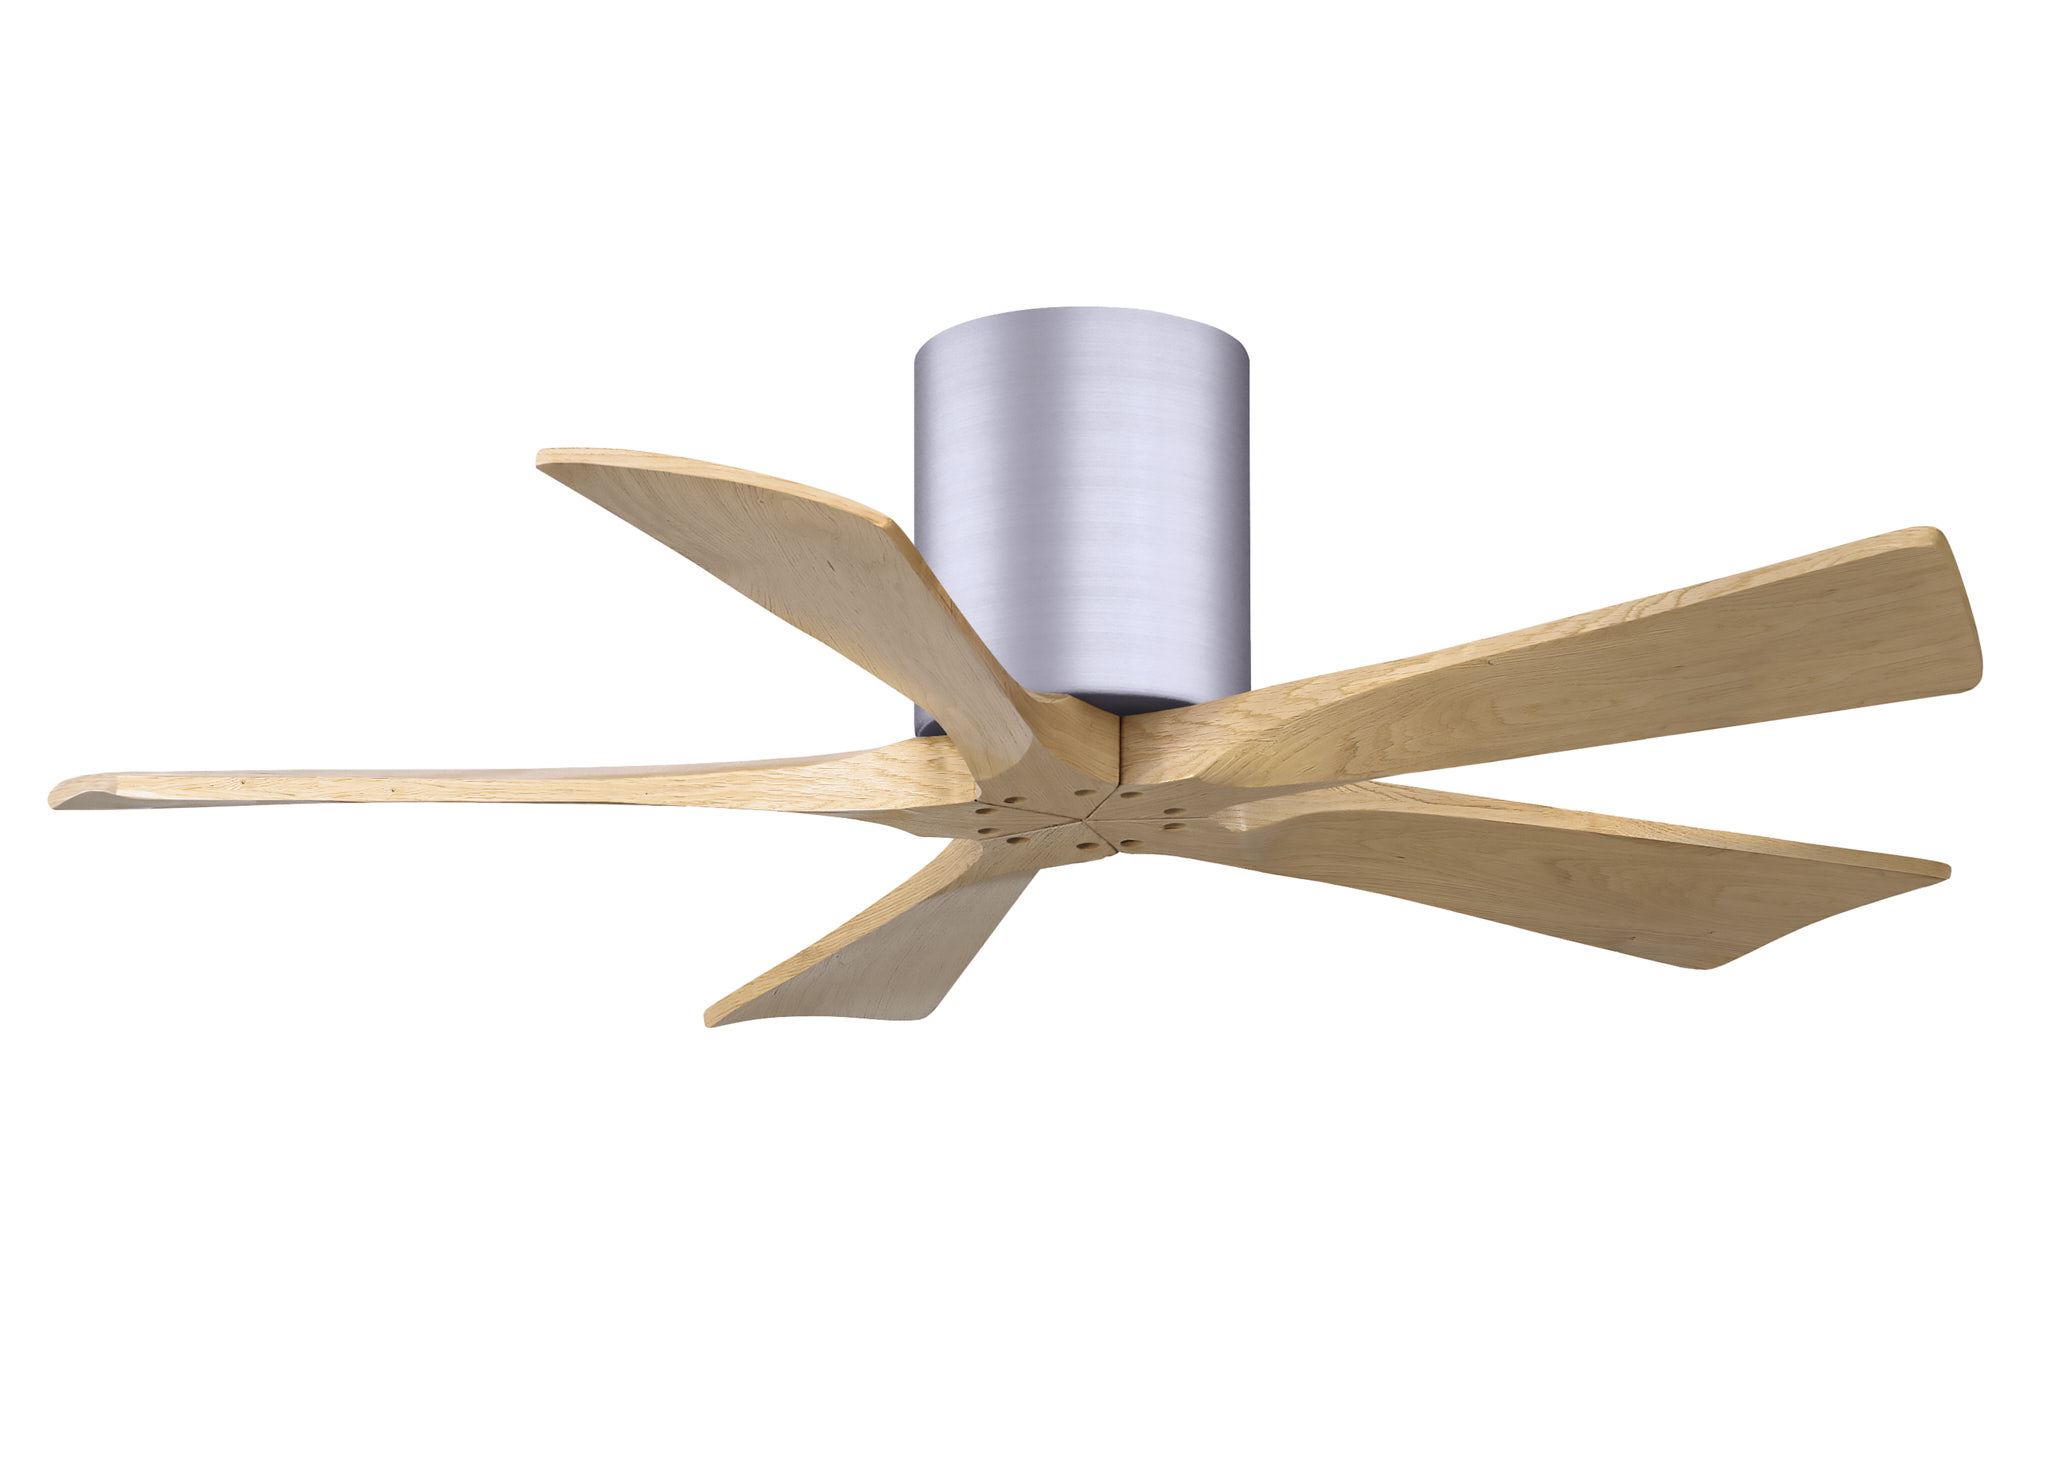 Irene-5H 6-speed ceiling fan in brushed nickel finish with 42